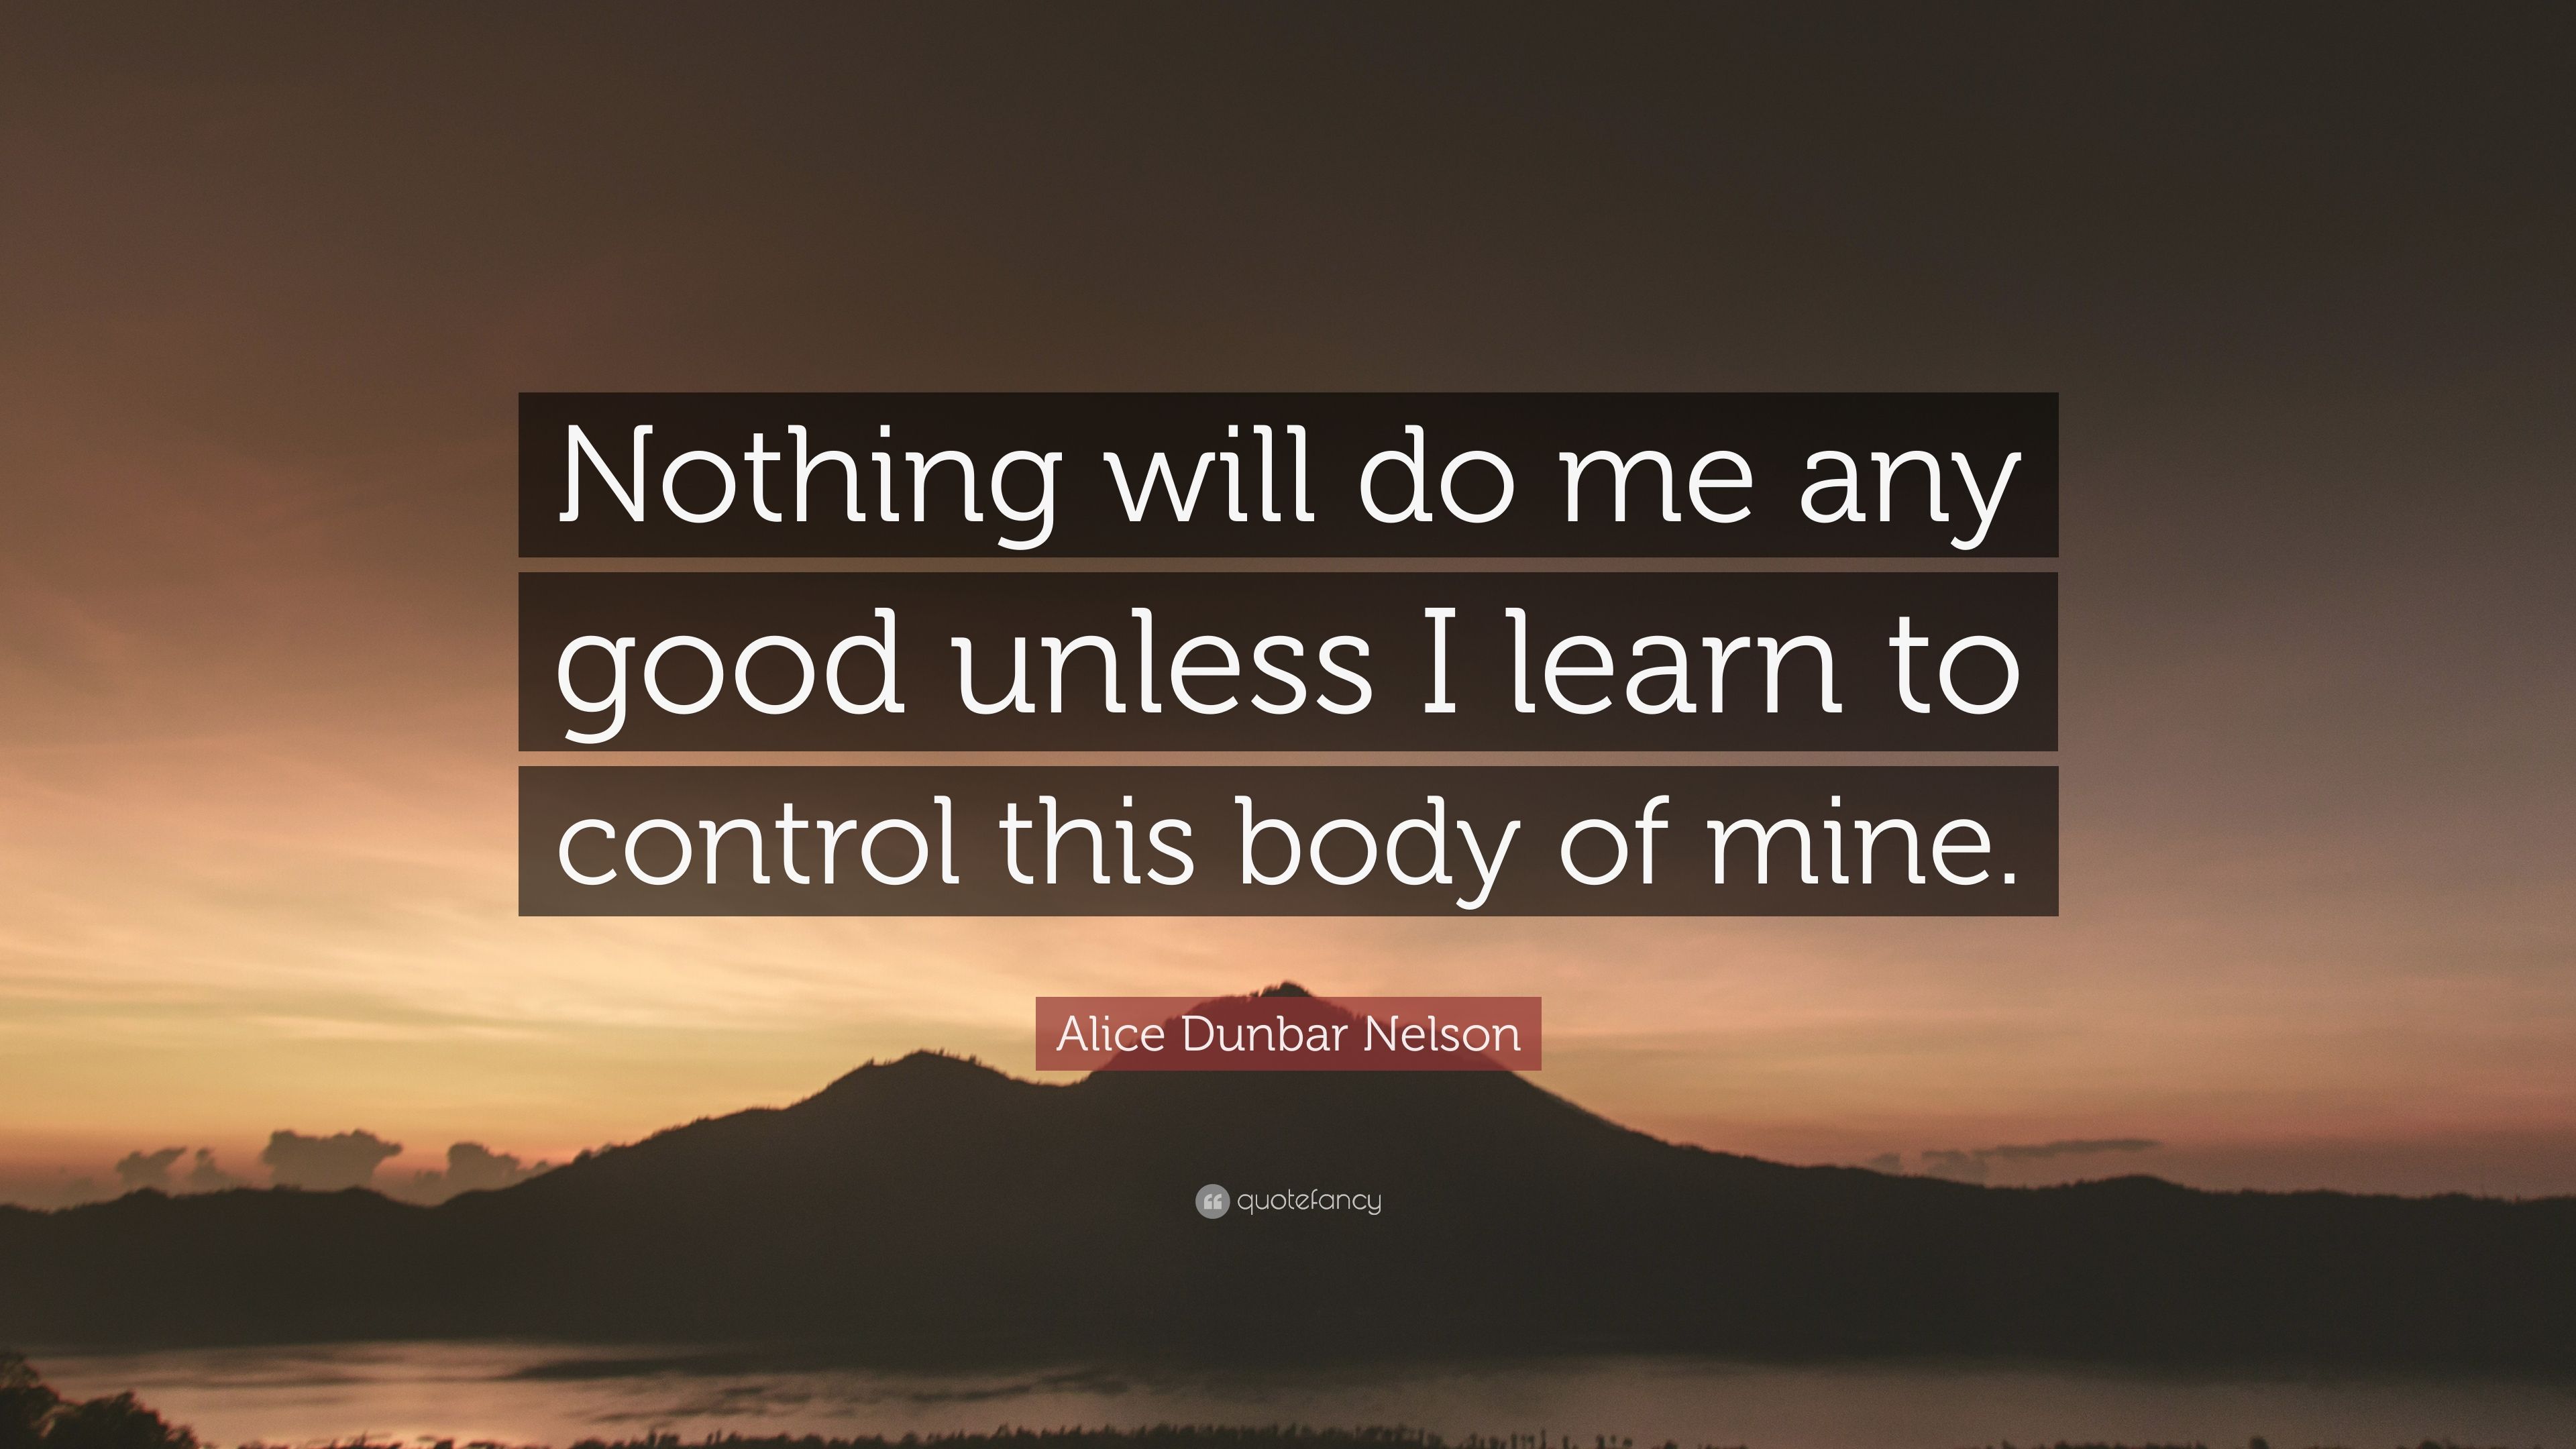 Alice dunbar nelson quote ânothing will do me any good unless i learn to control this